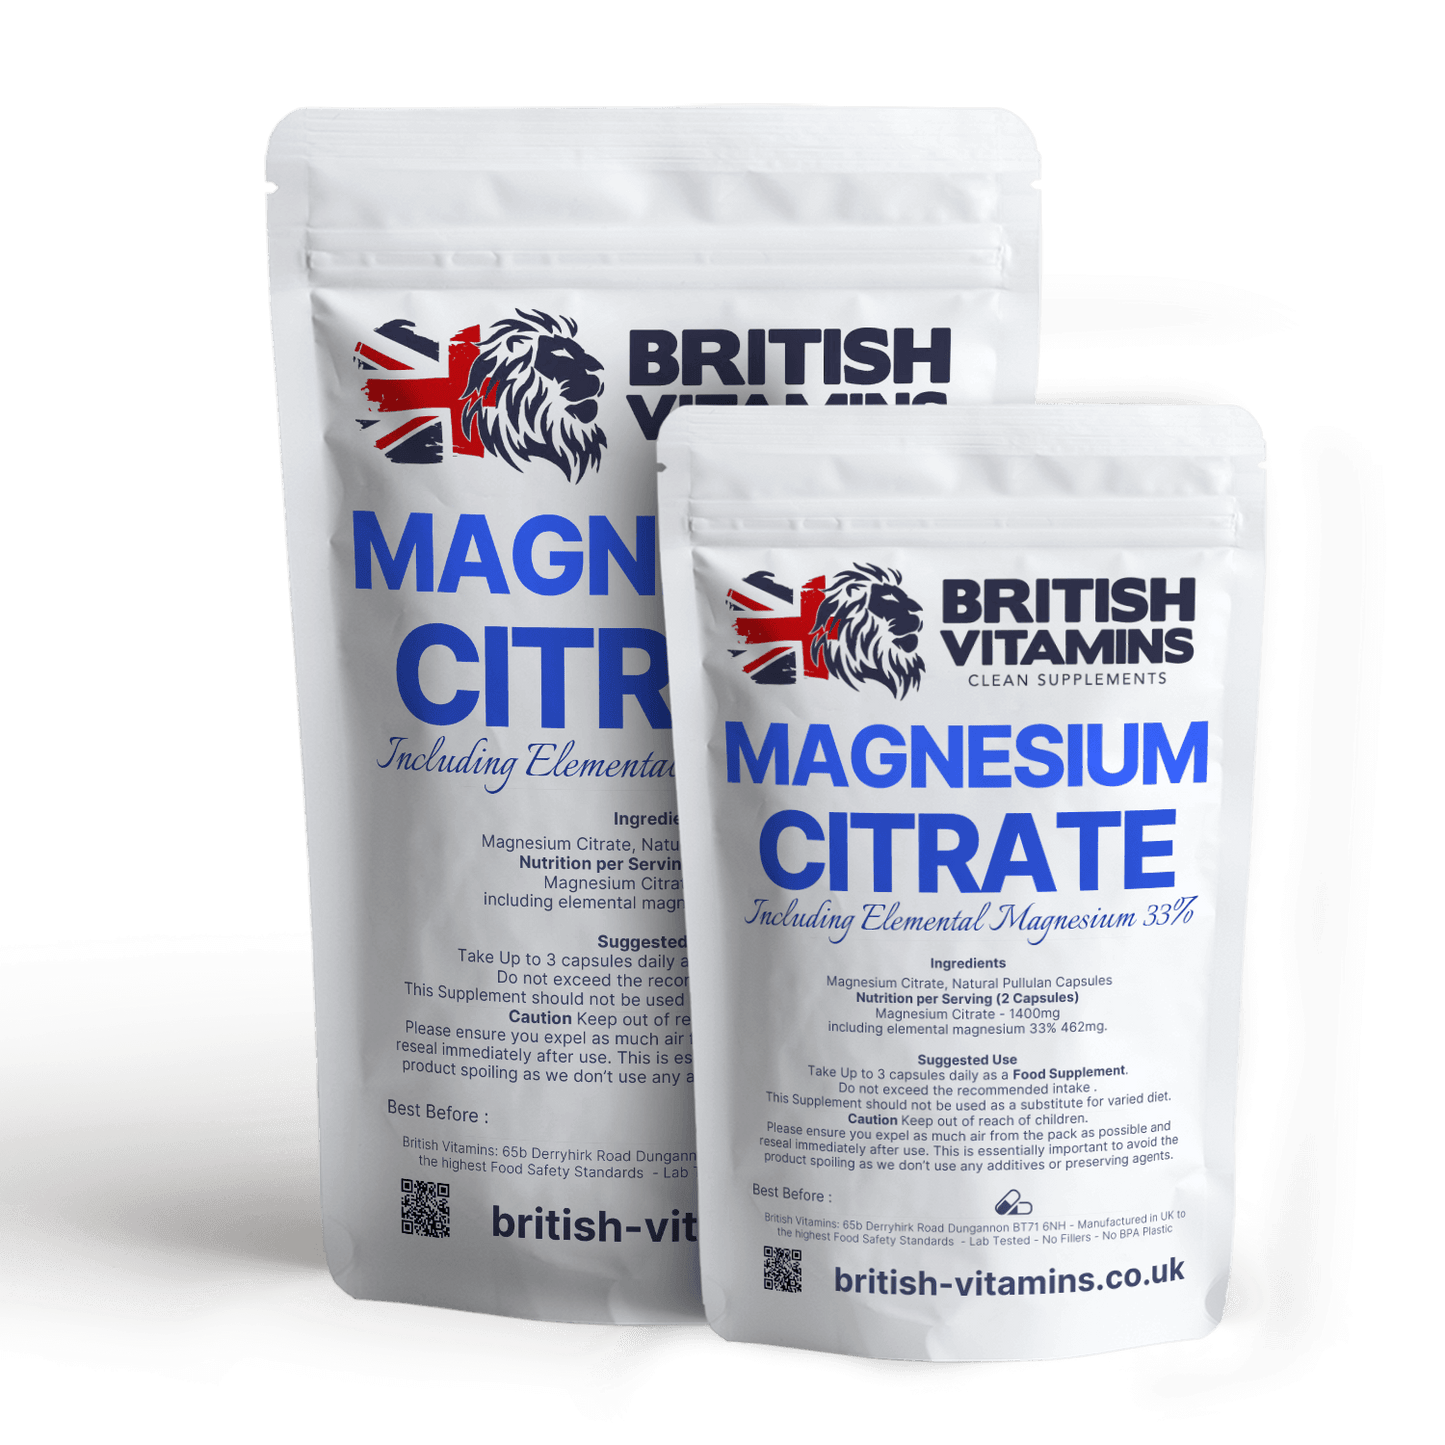 Magnesium Citrate Genuine Capsules 700mg - Additive Free Health & Beauty:Vitamins & Lifestyle Supplements:Vitamins & Minerals British Vitamins 120 Capsules (2 Months Supply )  